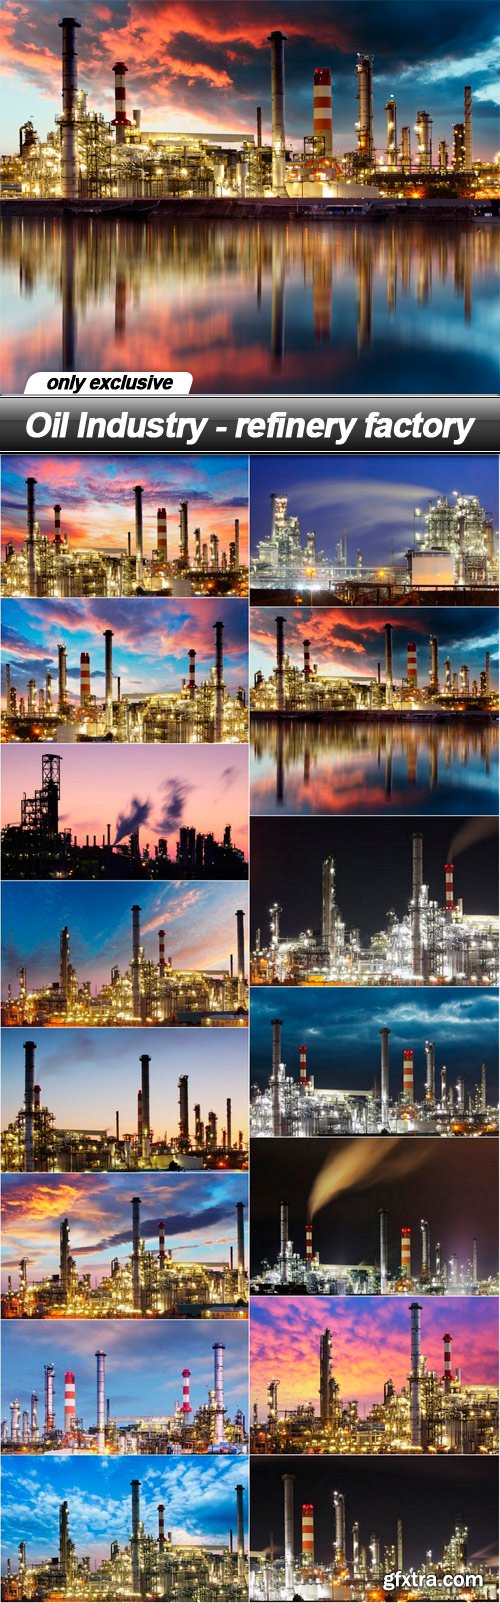 Oil Industry - refinery factory - 15 UHQ JPEG